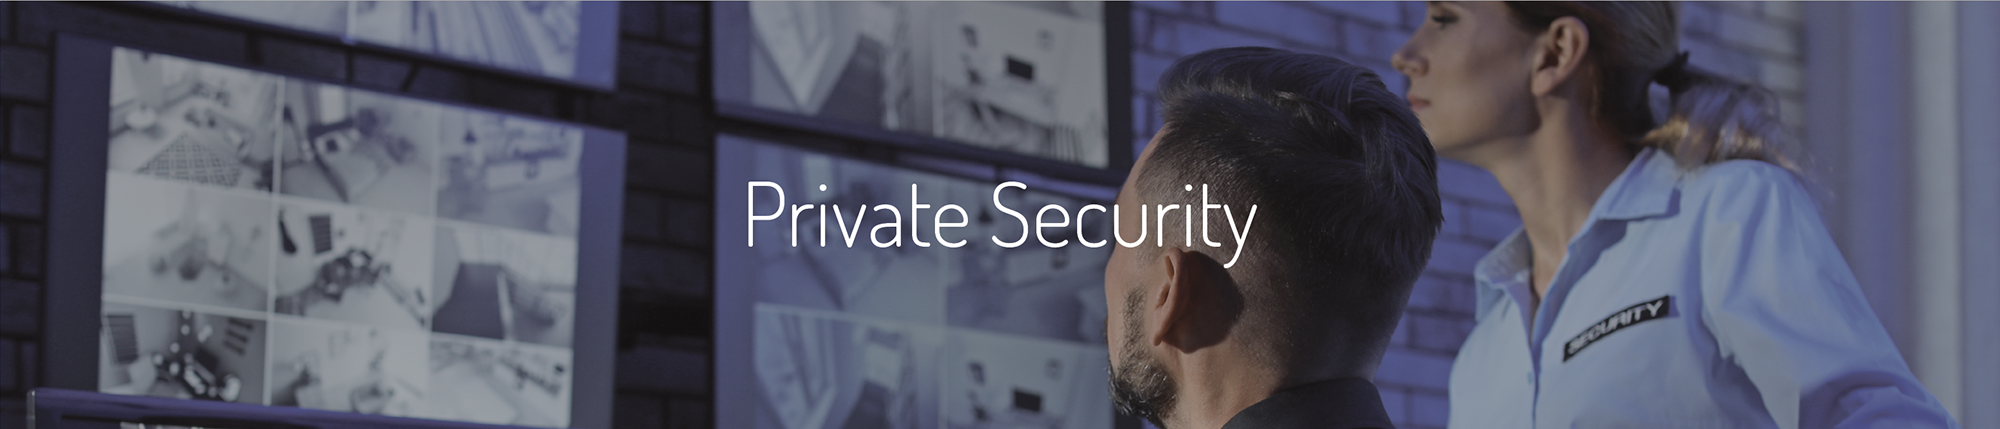 Main Image - Private Security